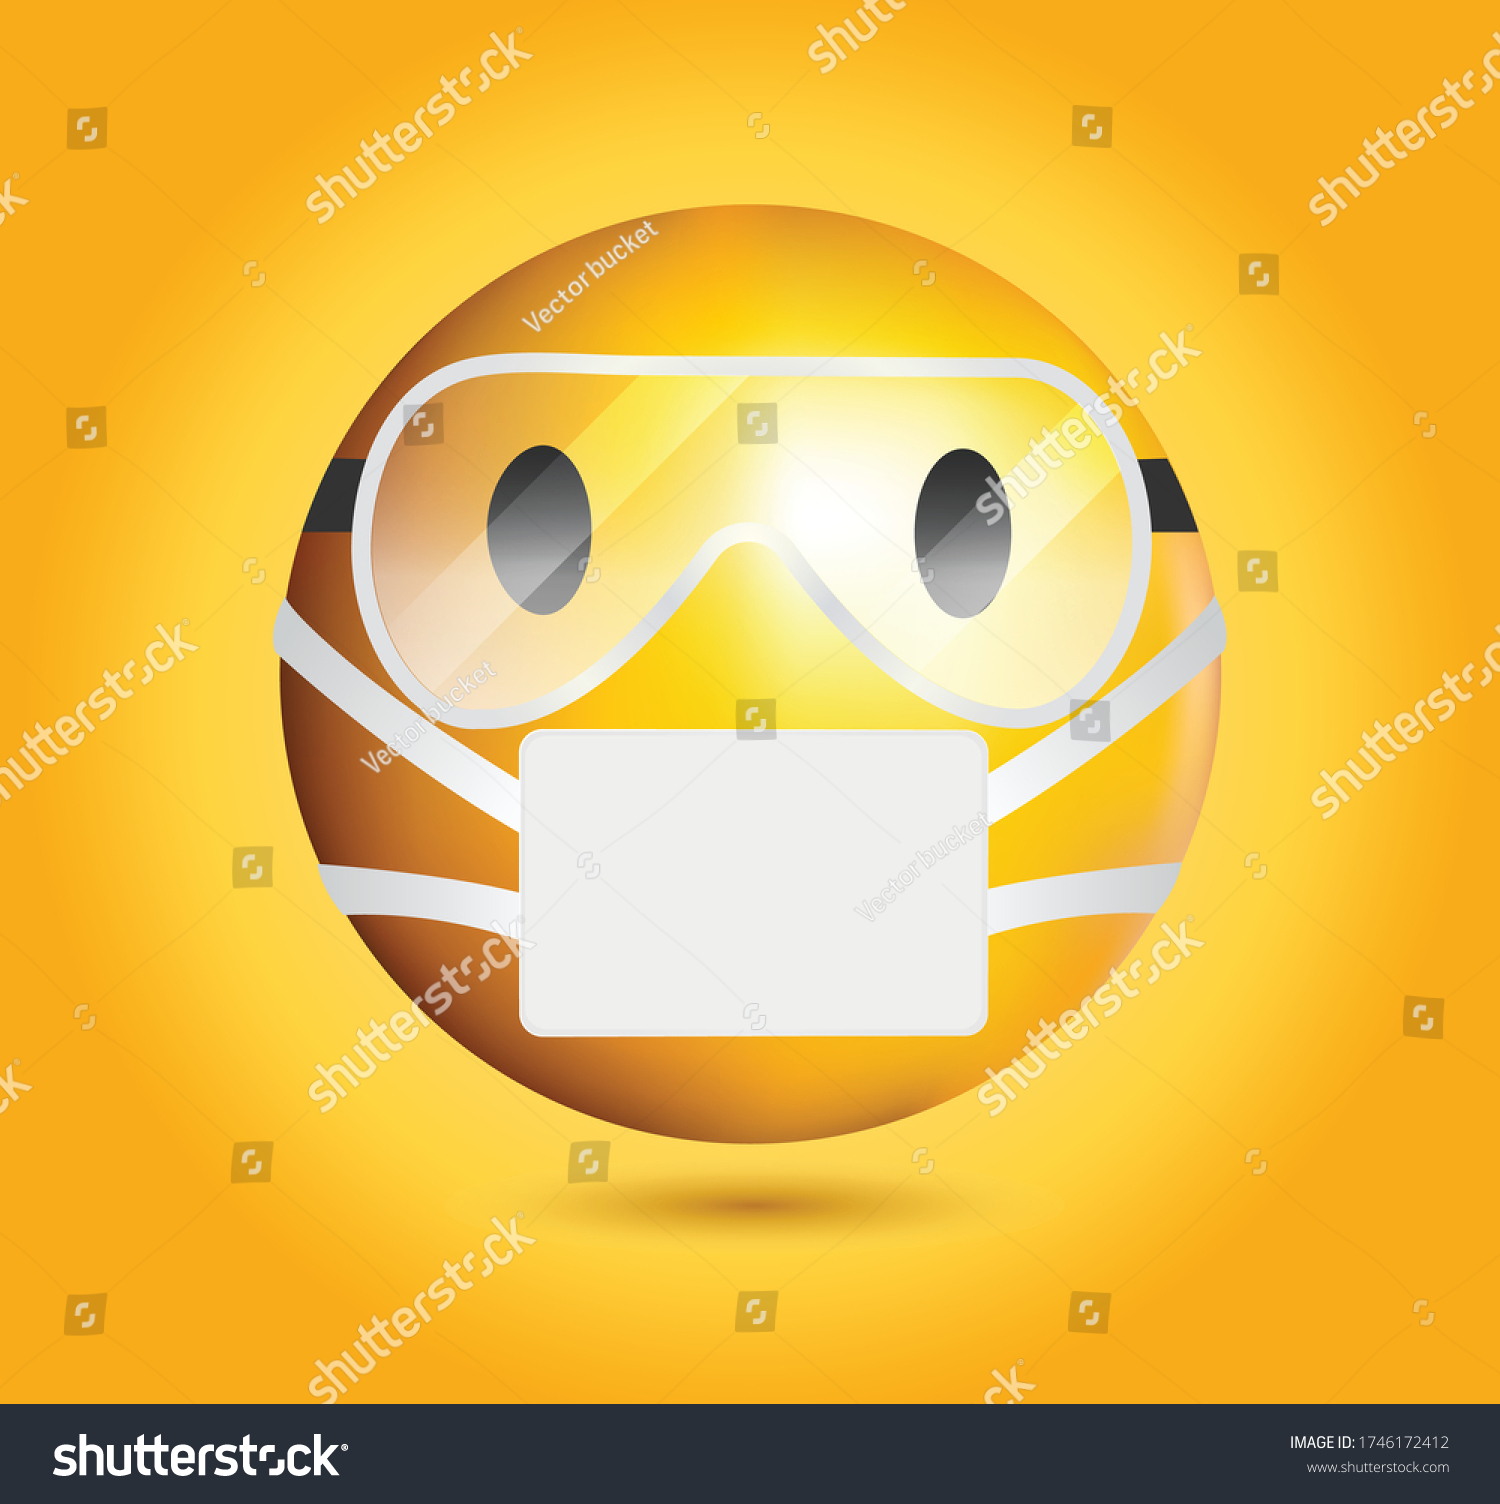 Download High Quality Mask Emoticon On Yellow Stock Vector Royalty Free 1746172412 Yellowimages Mockups